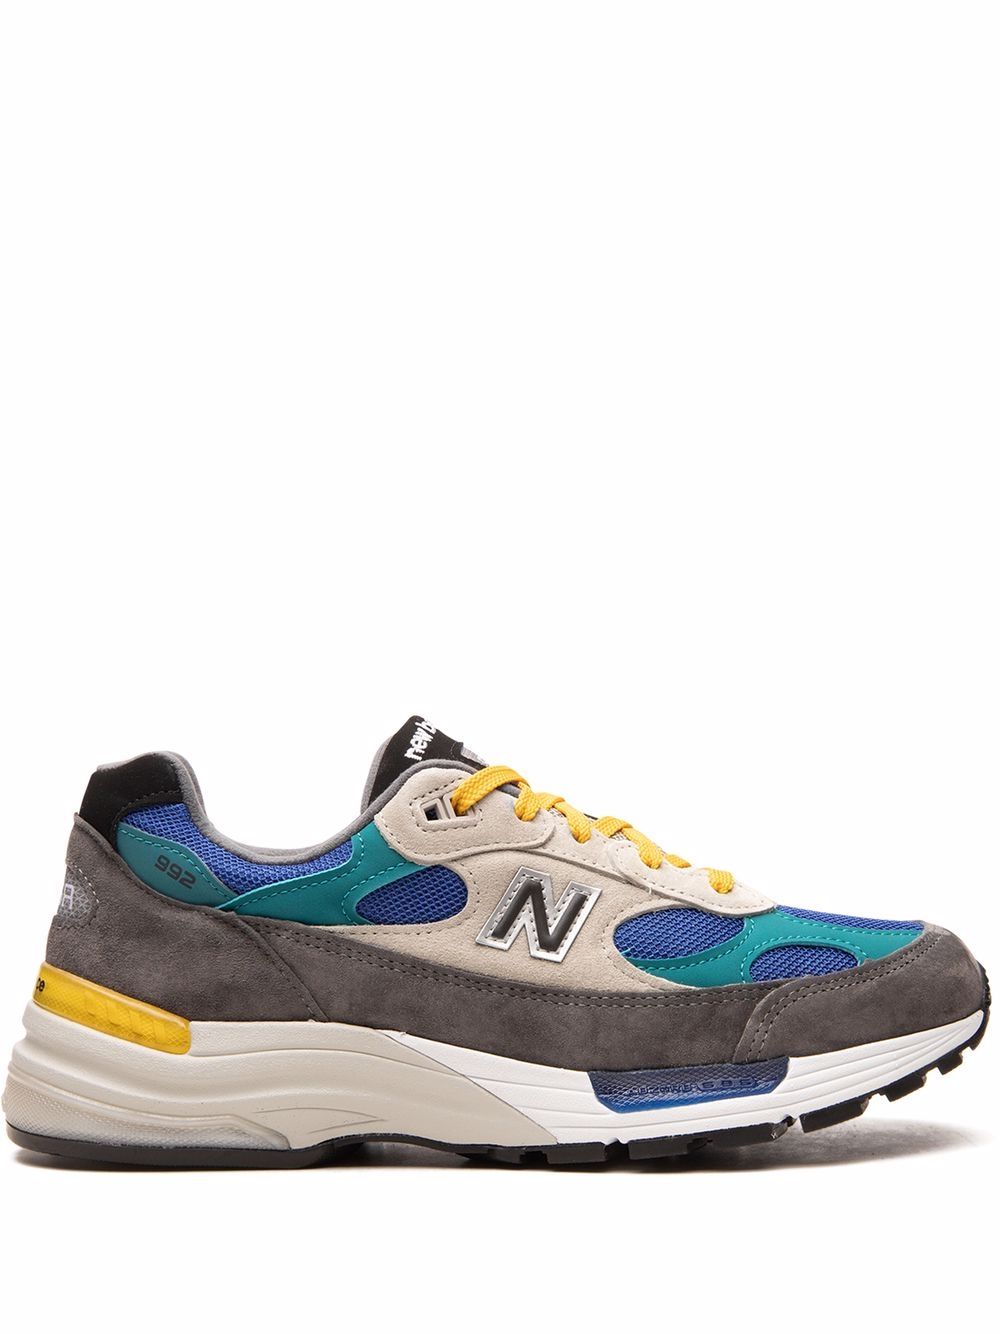 New Balance 992 "Grey/Blue/Teal/Yellow" low-top sneakers von New Balance